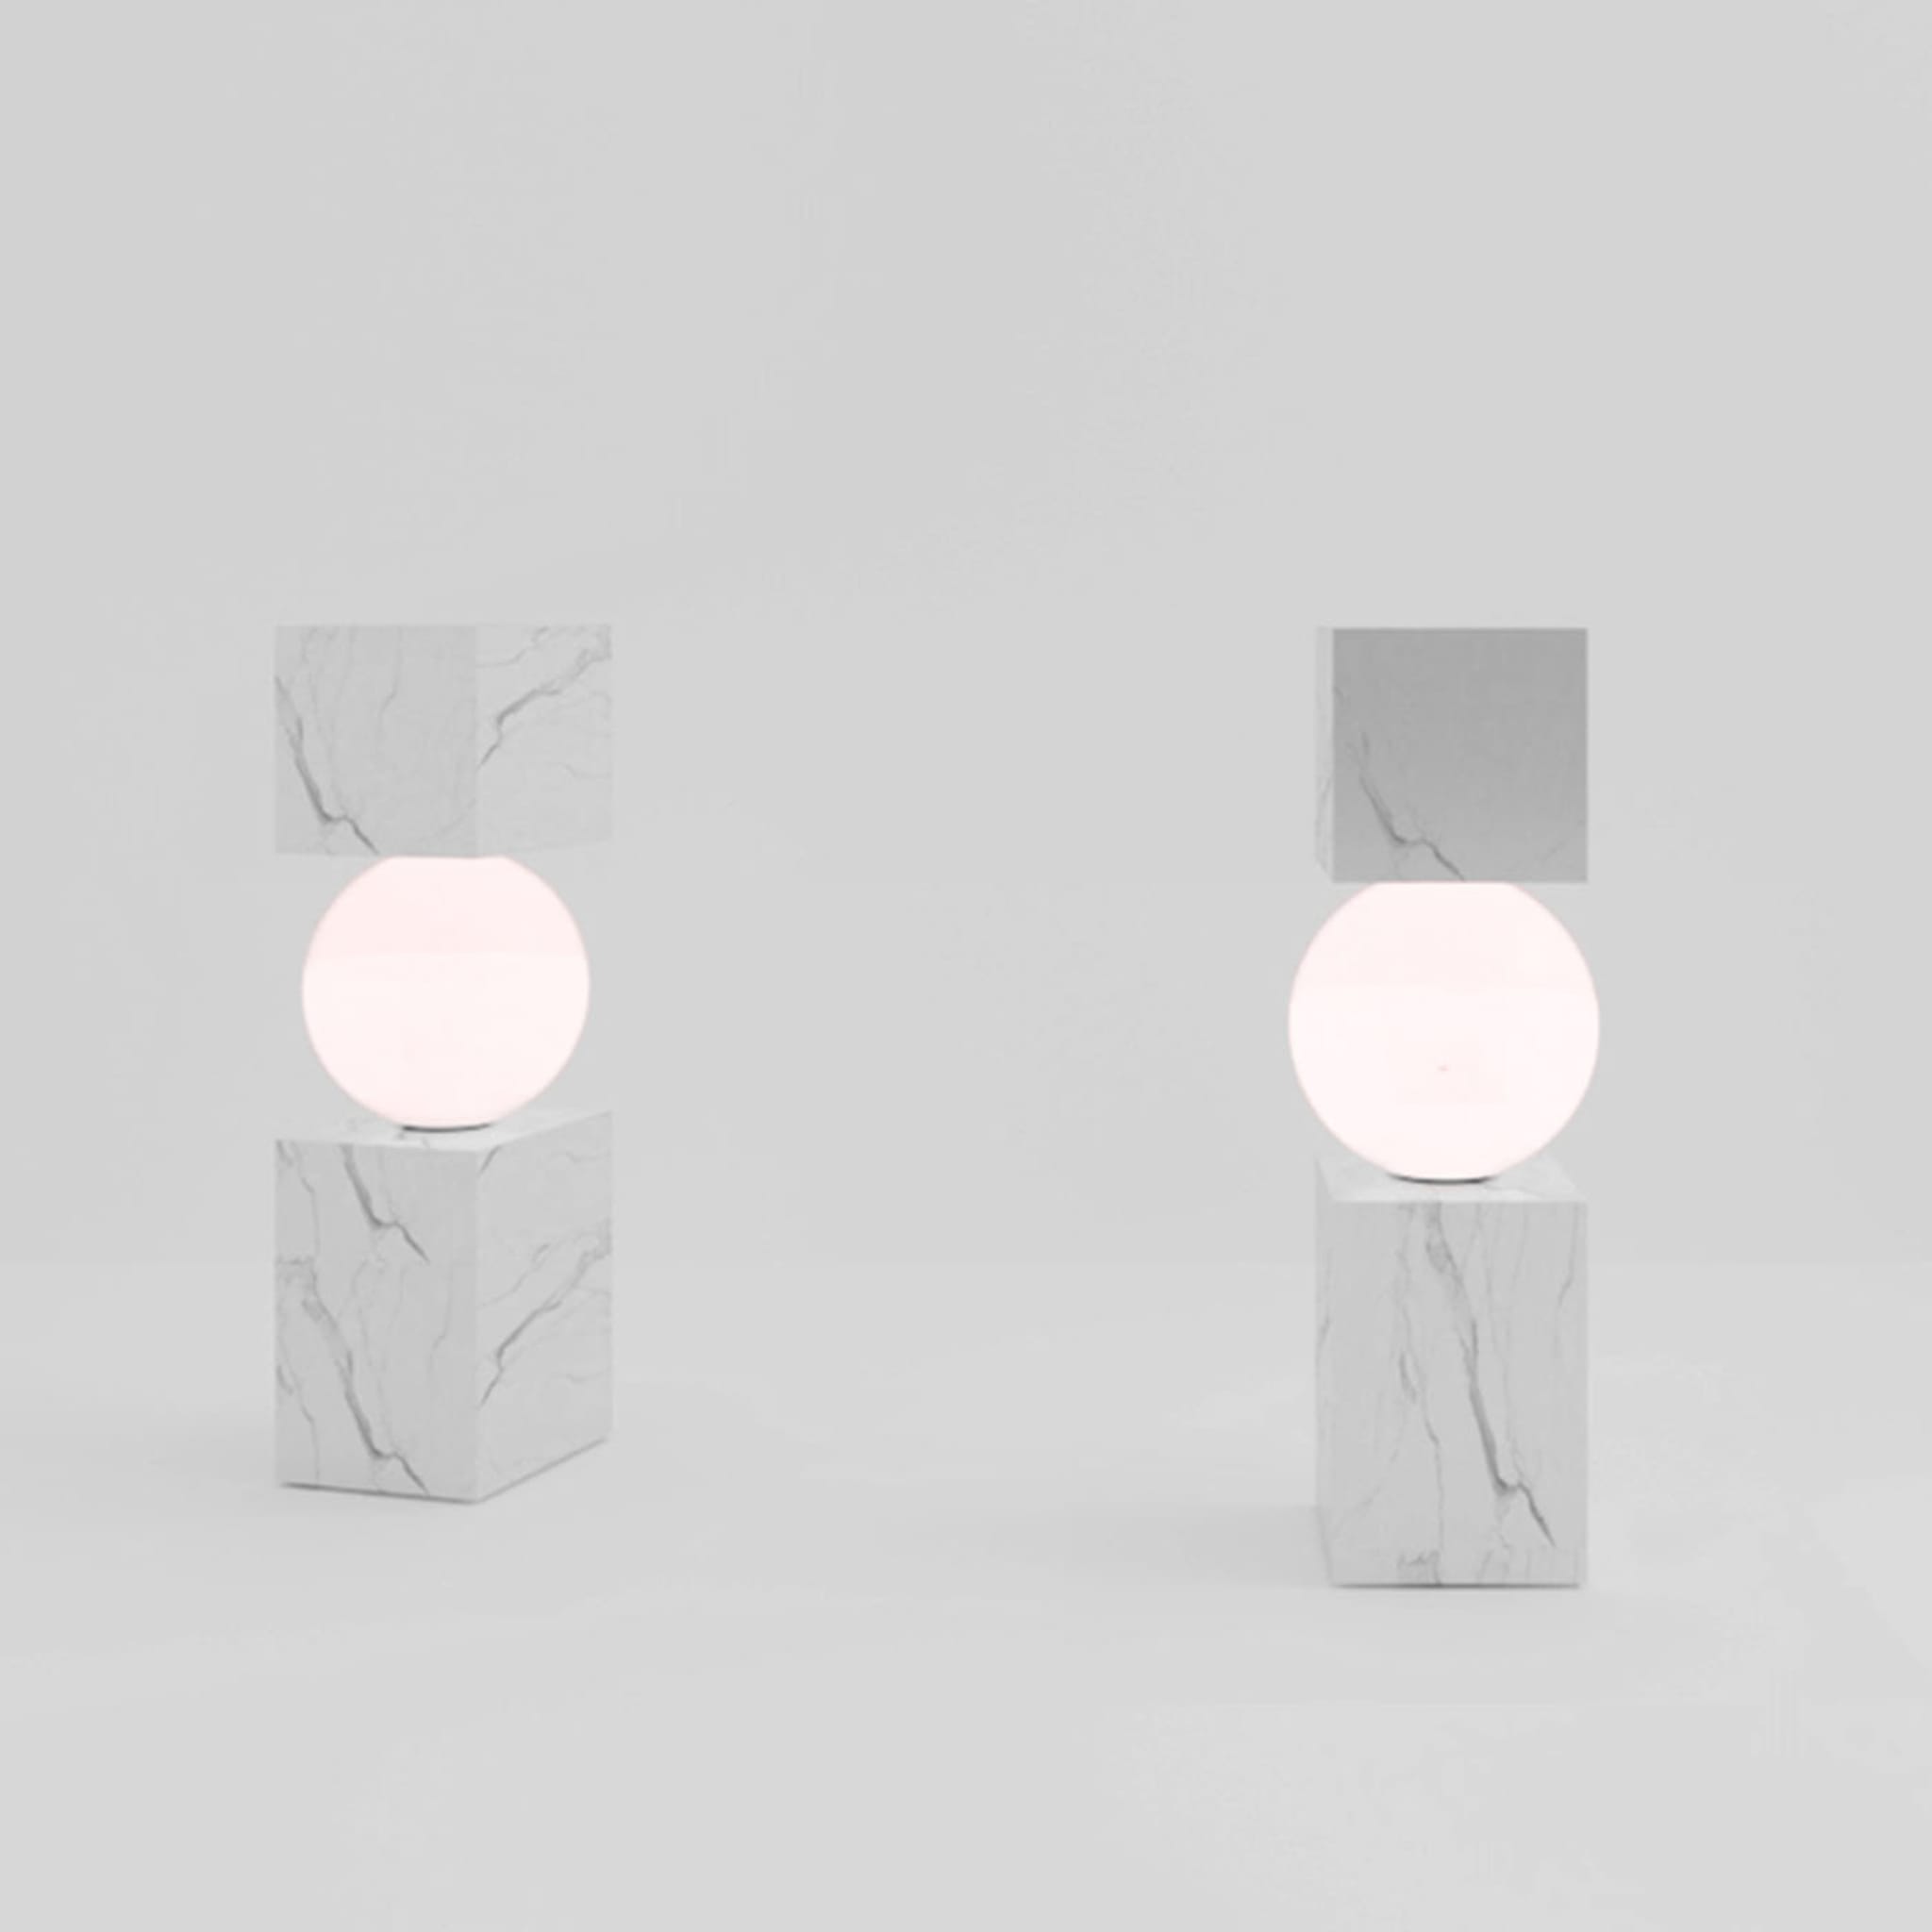 CS Table Lamp in Carrara Marble by sid&sign - Alternative view 1